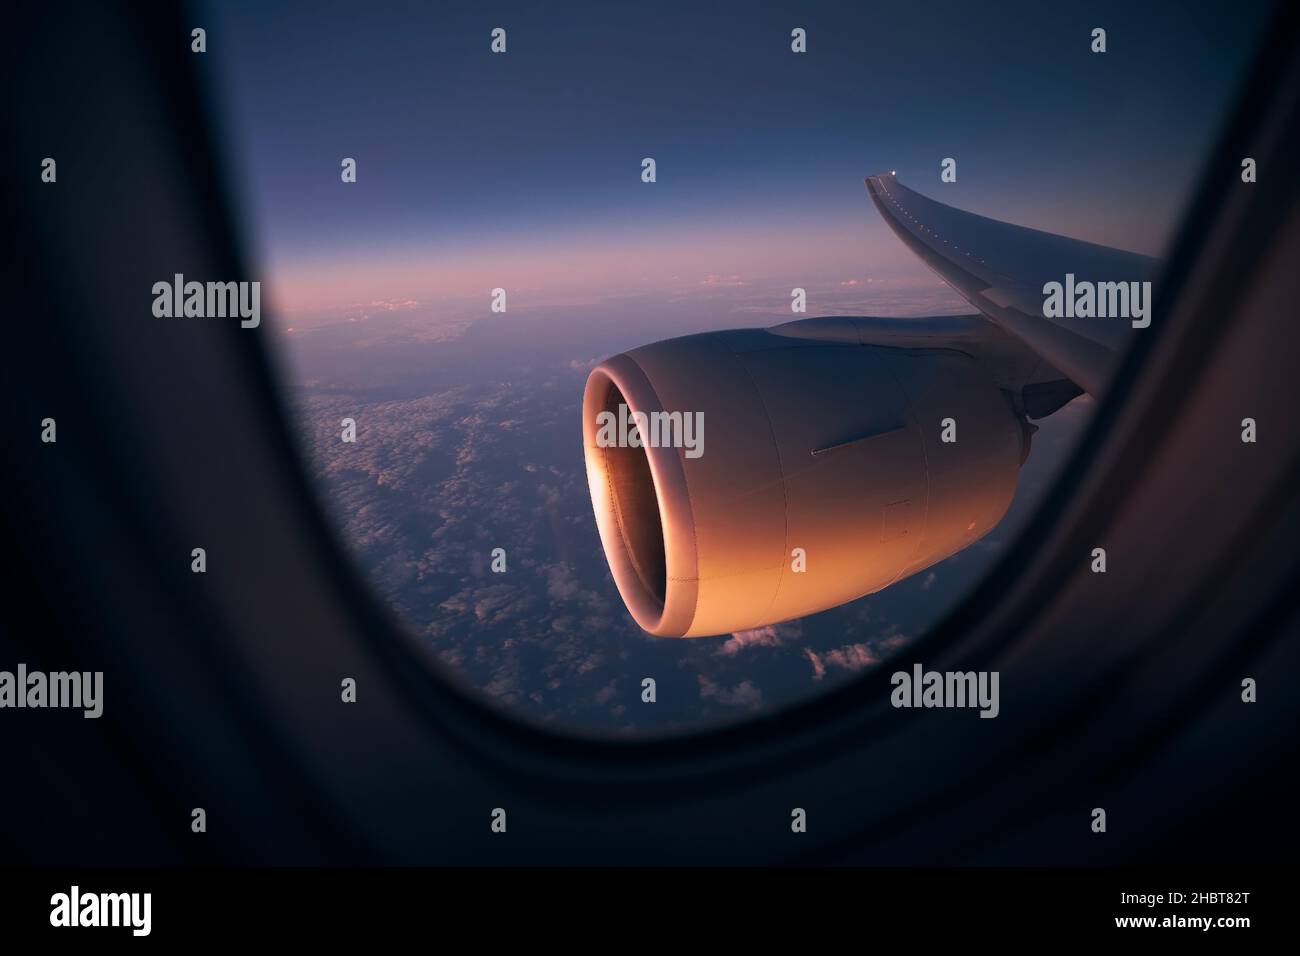 View from window of airplane during night flight above ocean. Selective focus on jet engine. Stock Photo